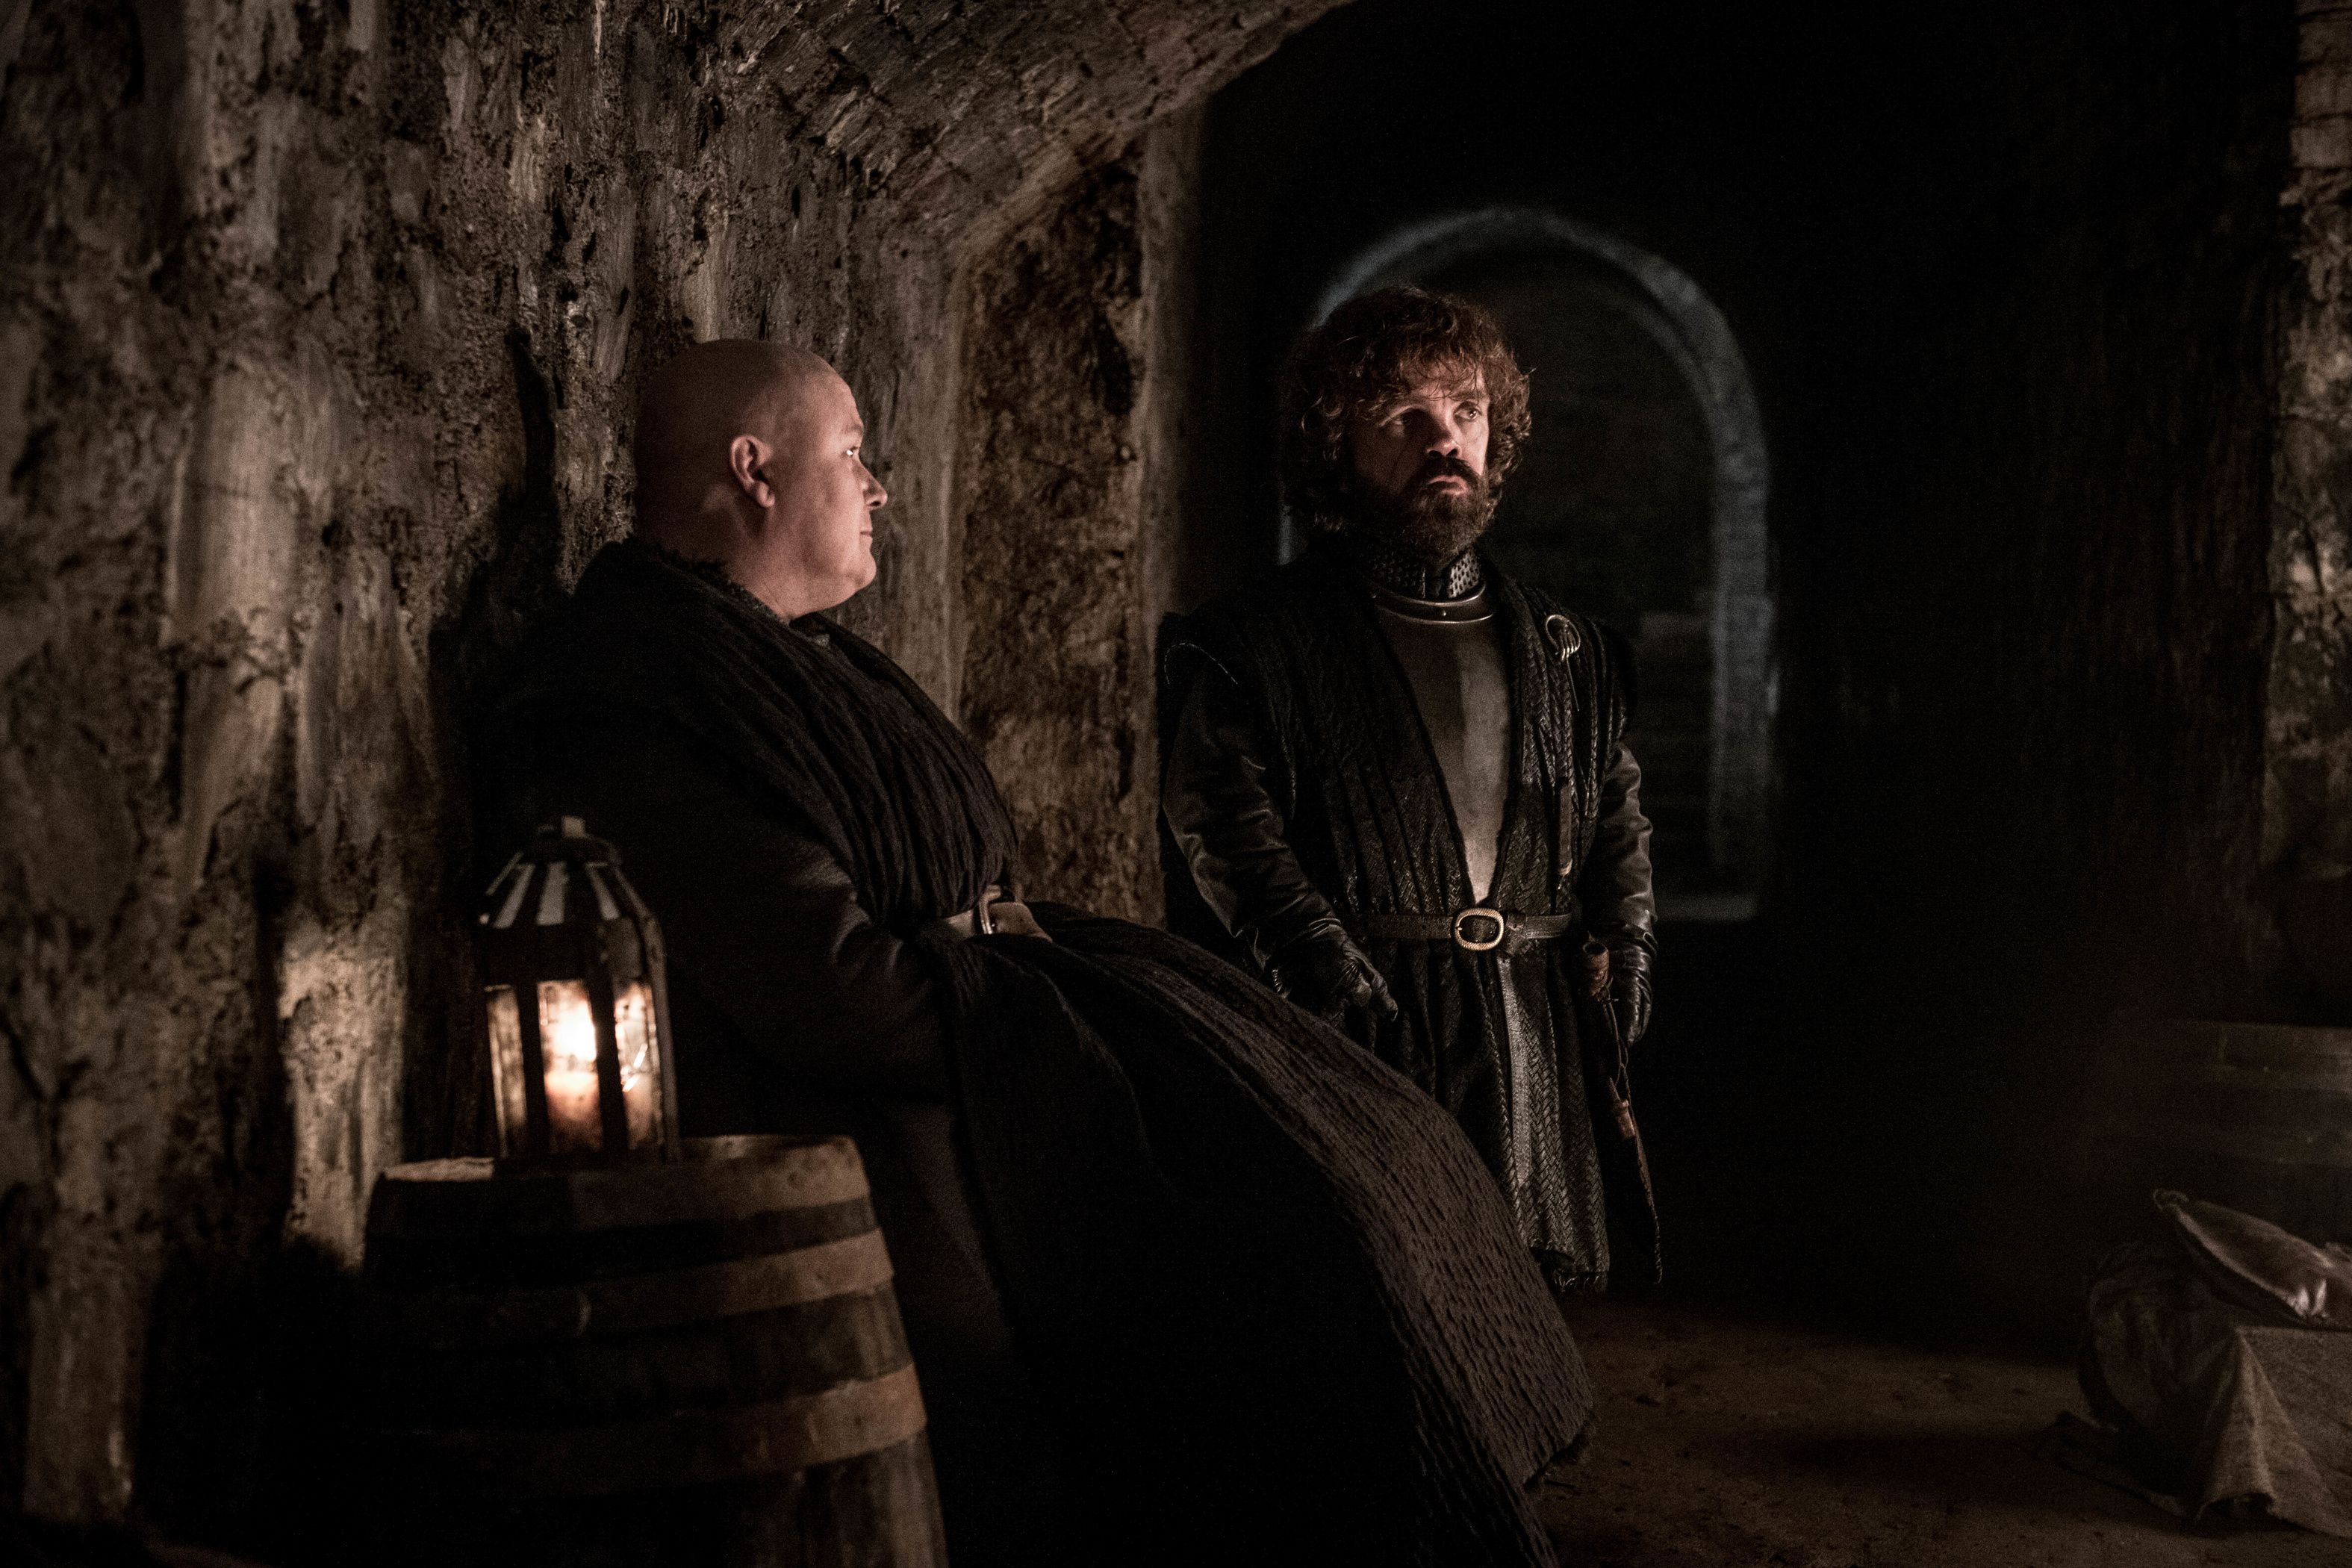 Game of Through Season 8 Episode 3 Images: The Battle of Winterfell